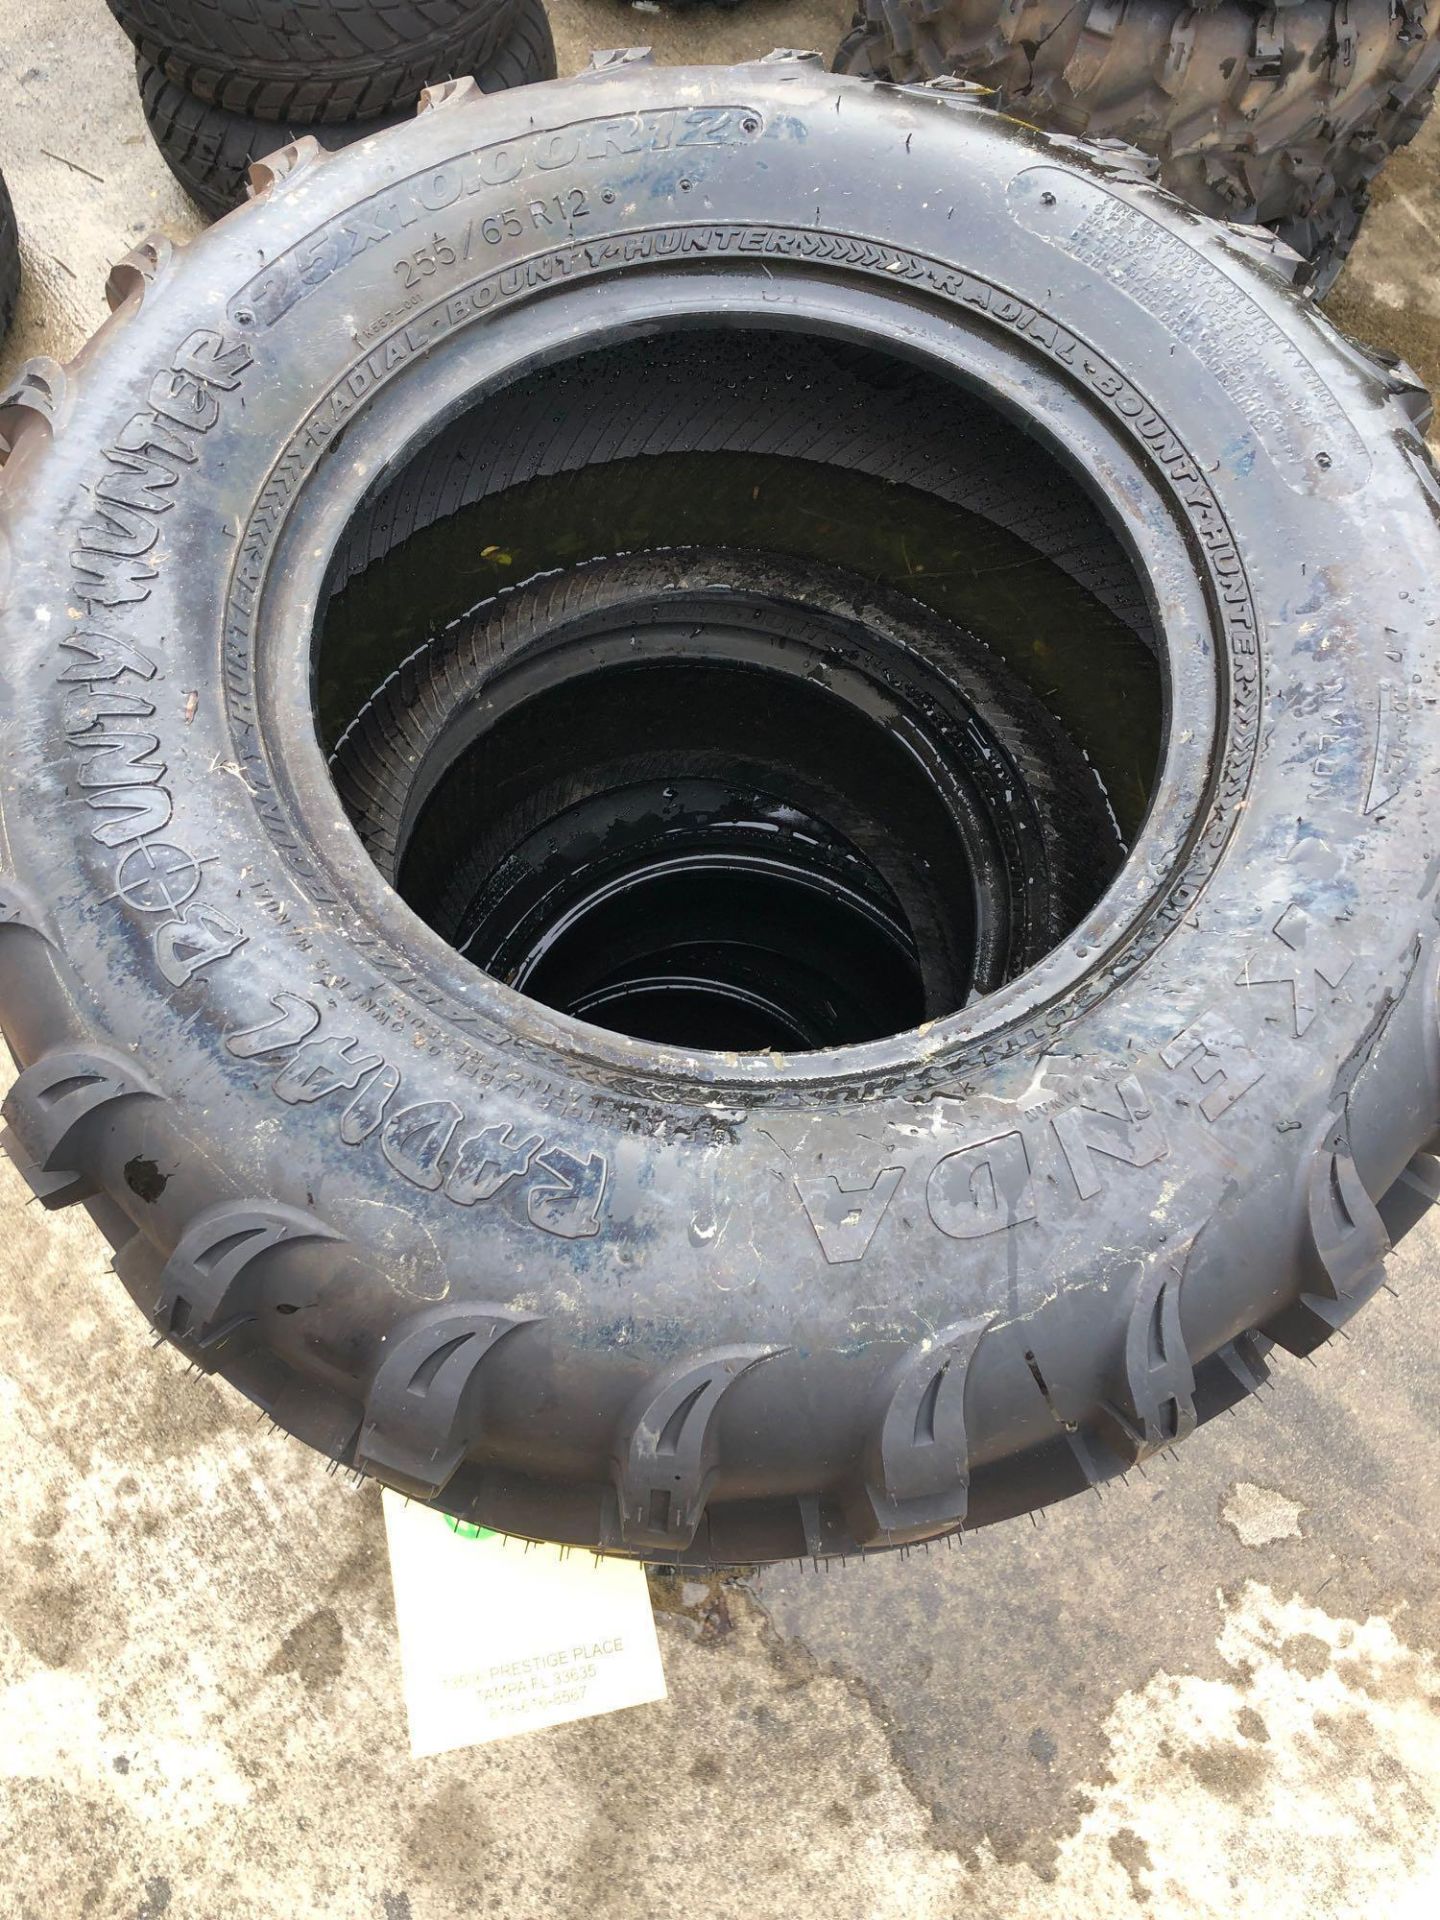 SET OF NEW TIRES 25 x 10R12 - Image 2 of 2